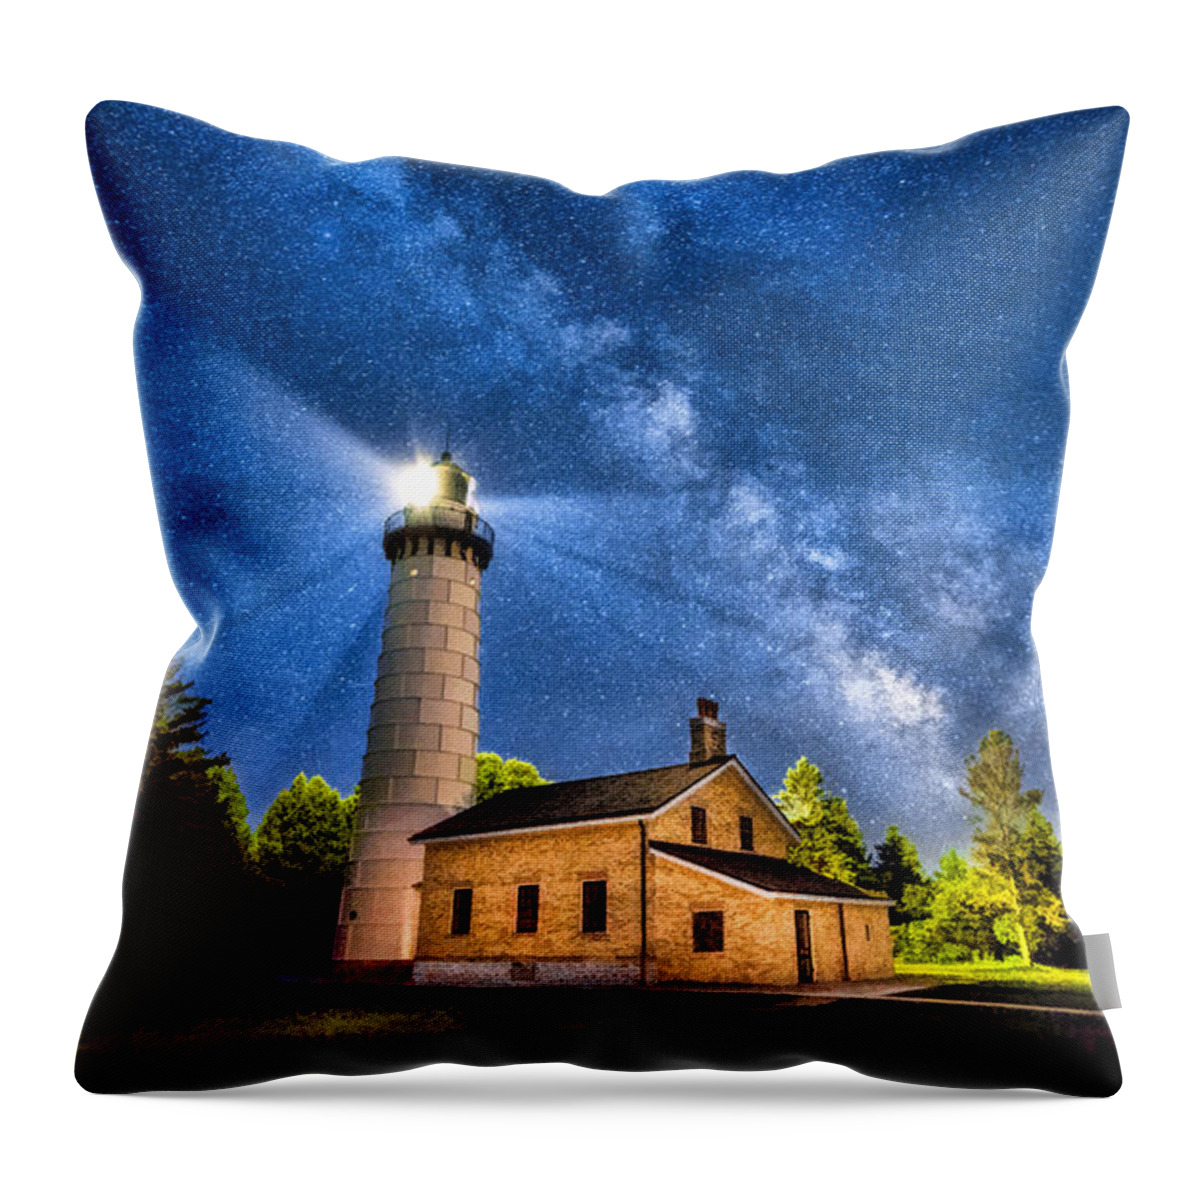 Door County Throw Pillow featuring the painting Cana Island Lighthouse Milky Way in Door County Wisconsin by Christopher Arndt